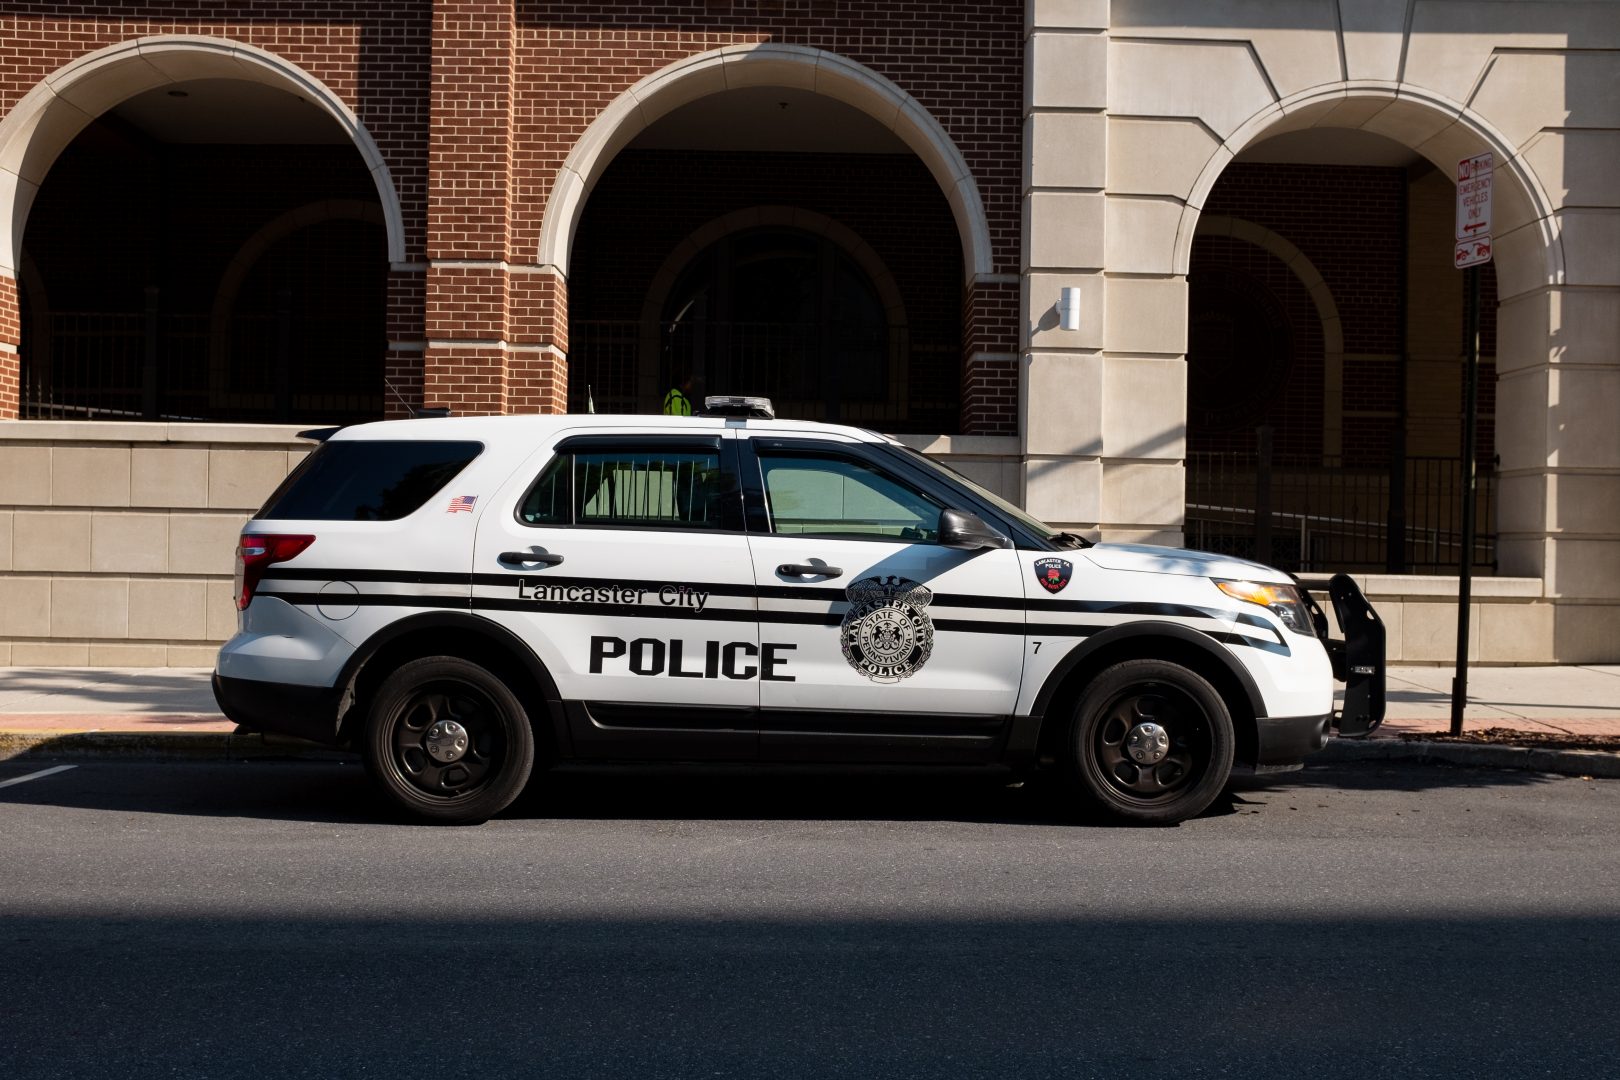 A Lancaster City Police vehicle is seen in this photo taken Aug. 6, 2019.